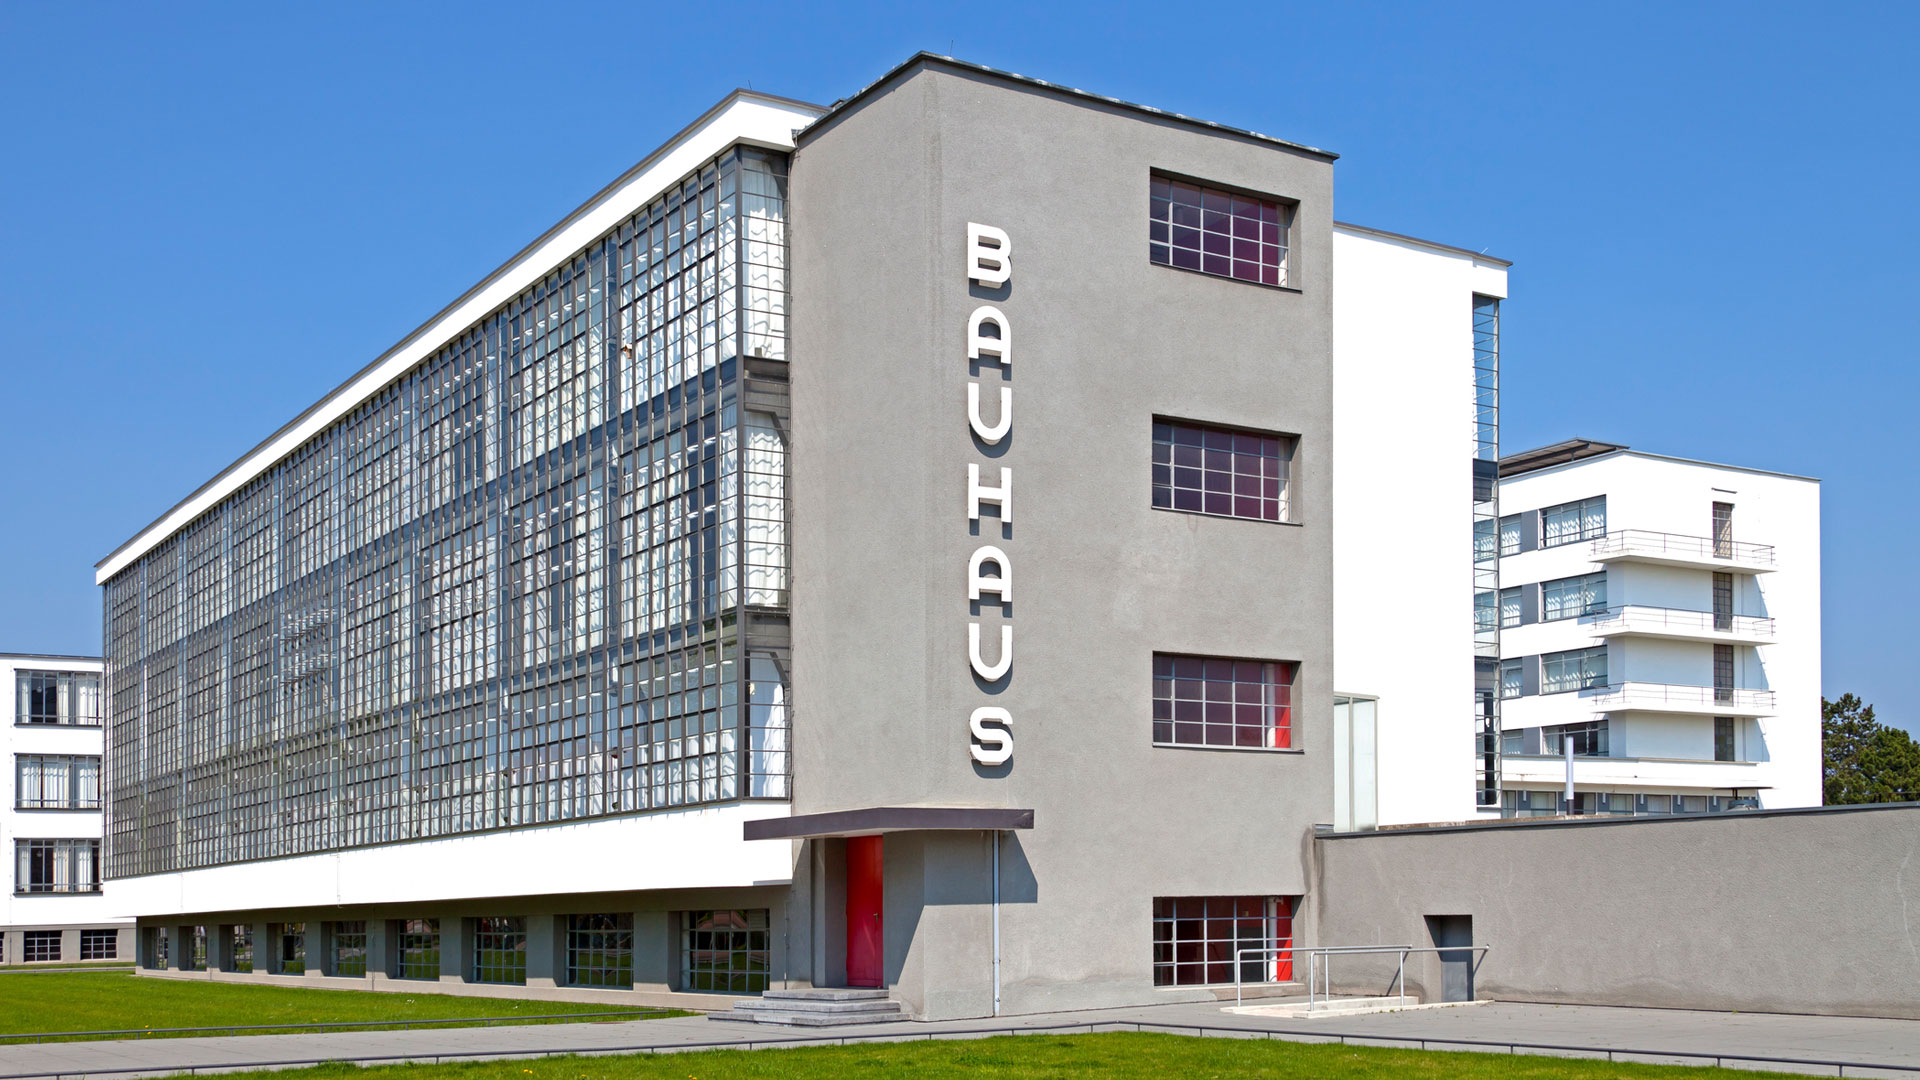 Bauhaus: What was it and why is it important today?